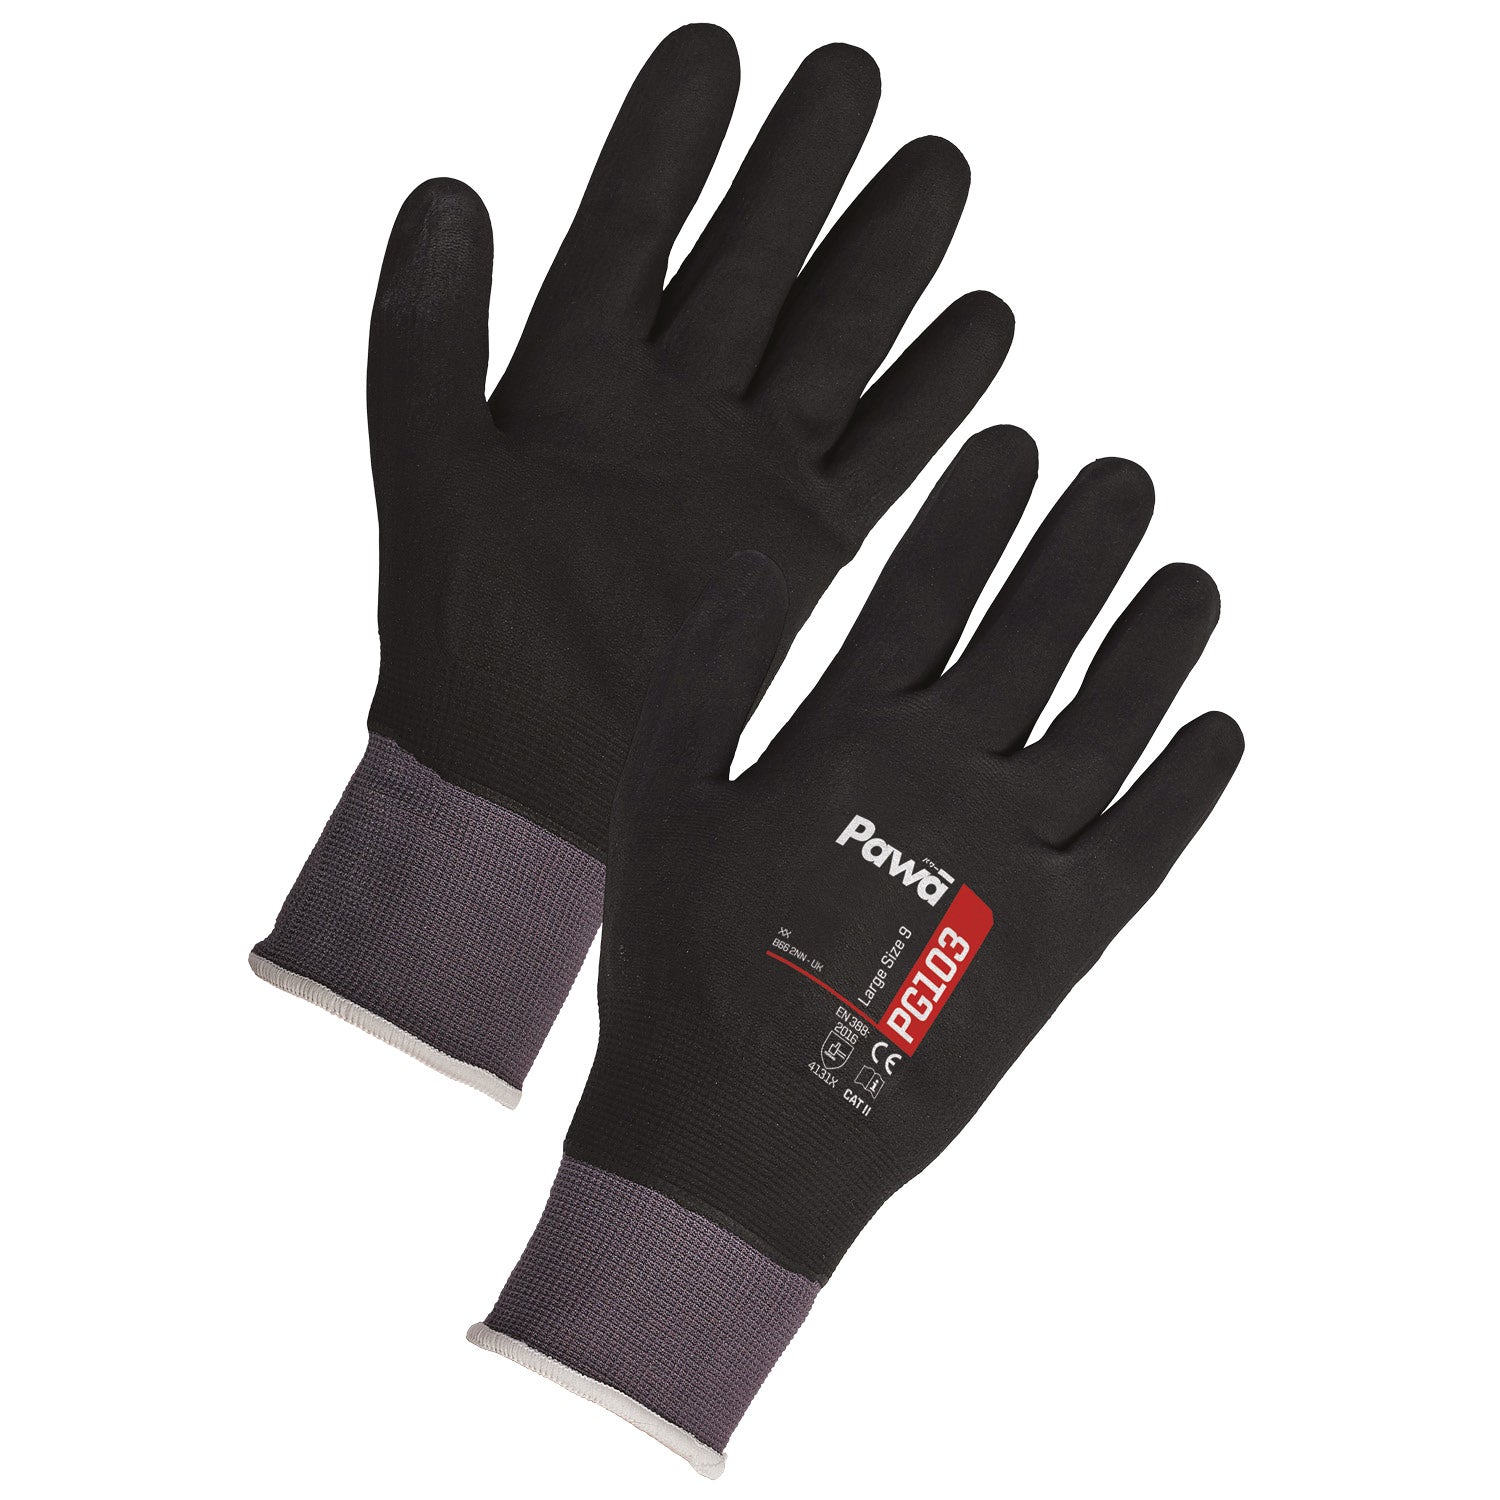 Supertouch Pawa PG103 Breathable Glove